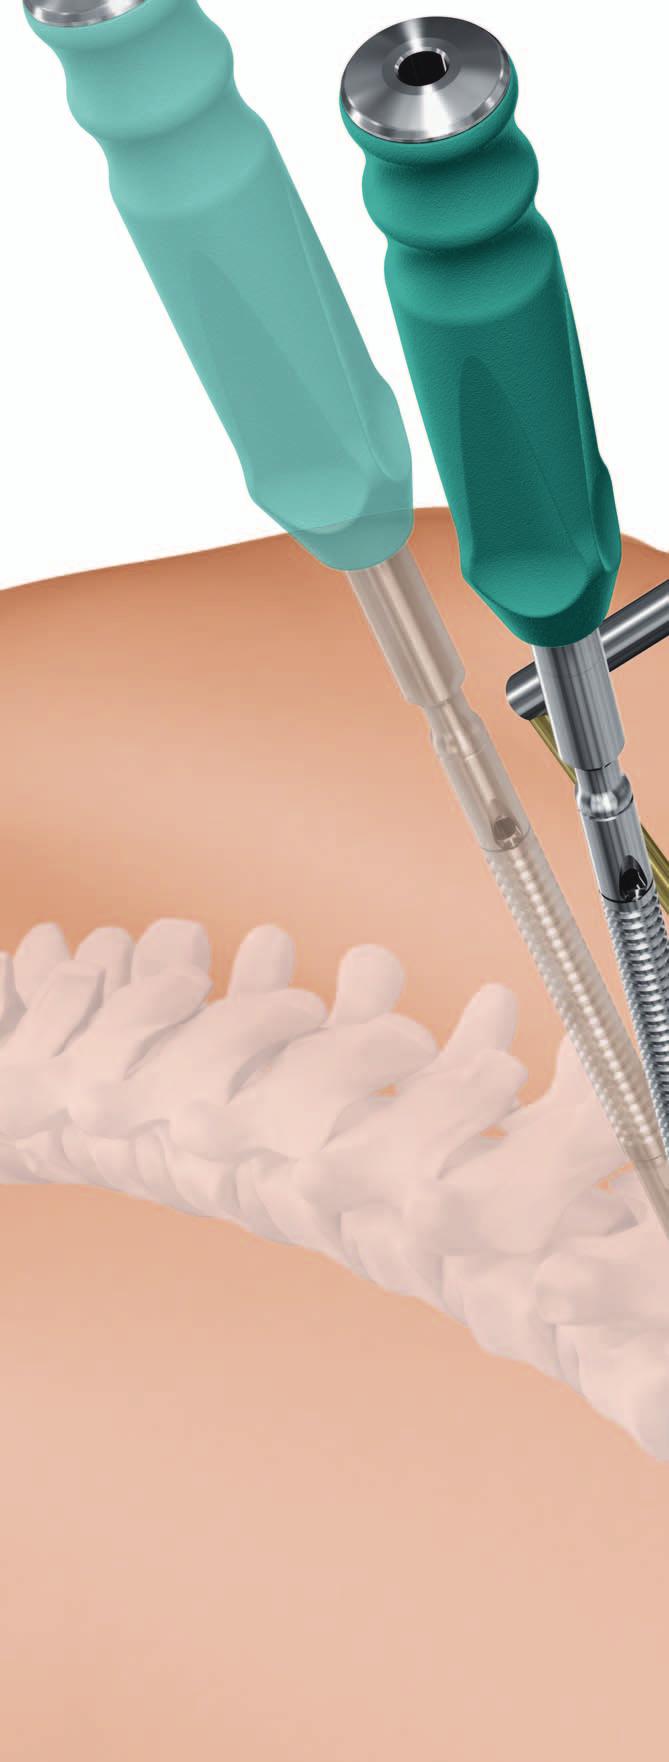 USS Fracture MIS. The minimally invasive Schanz Screw system for complete spinal fracture reduction.